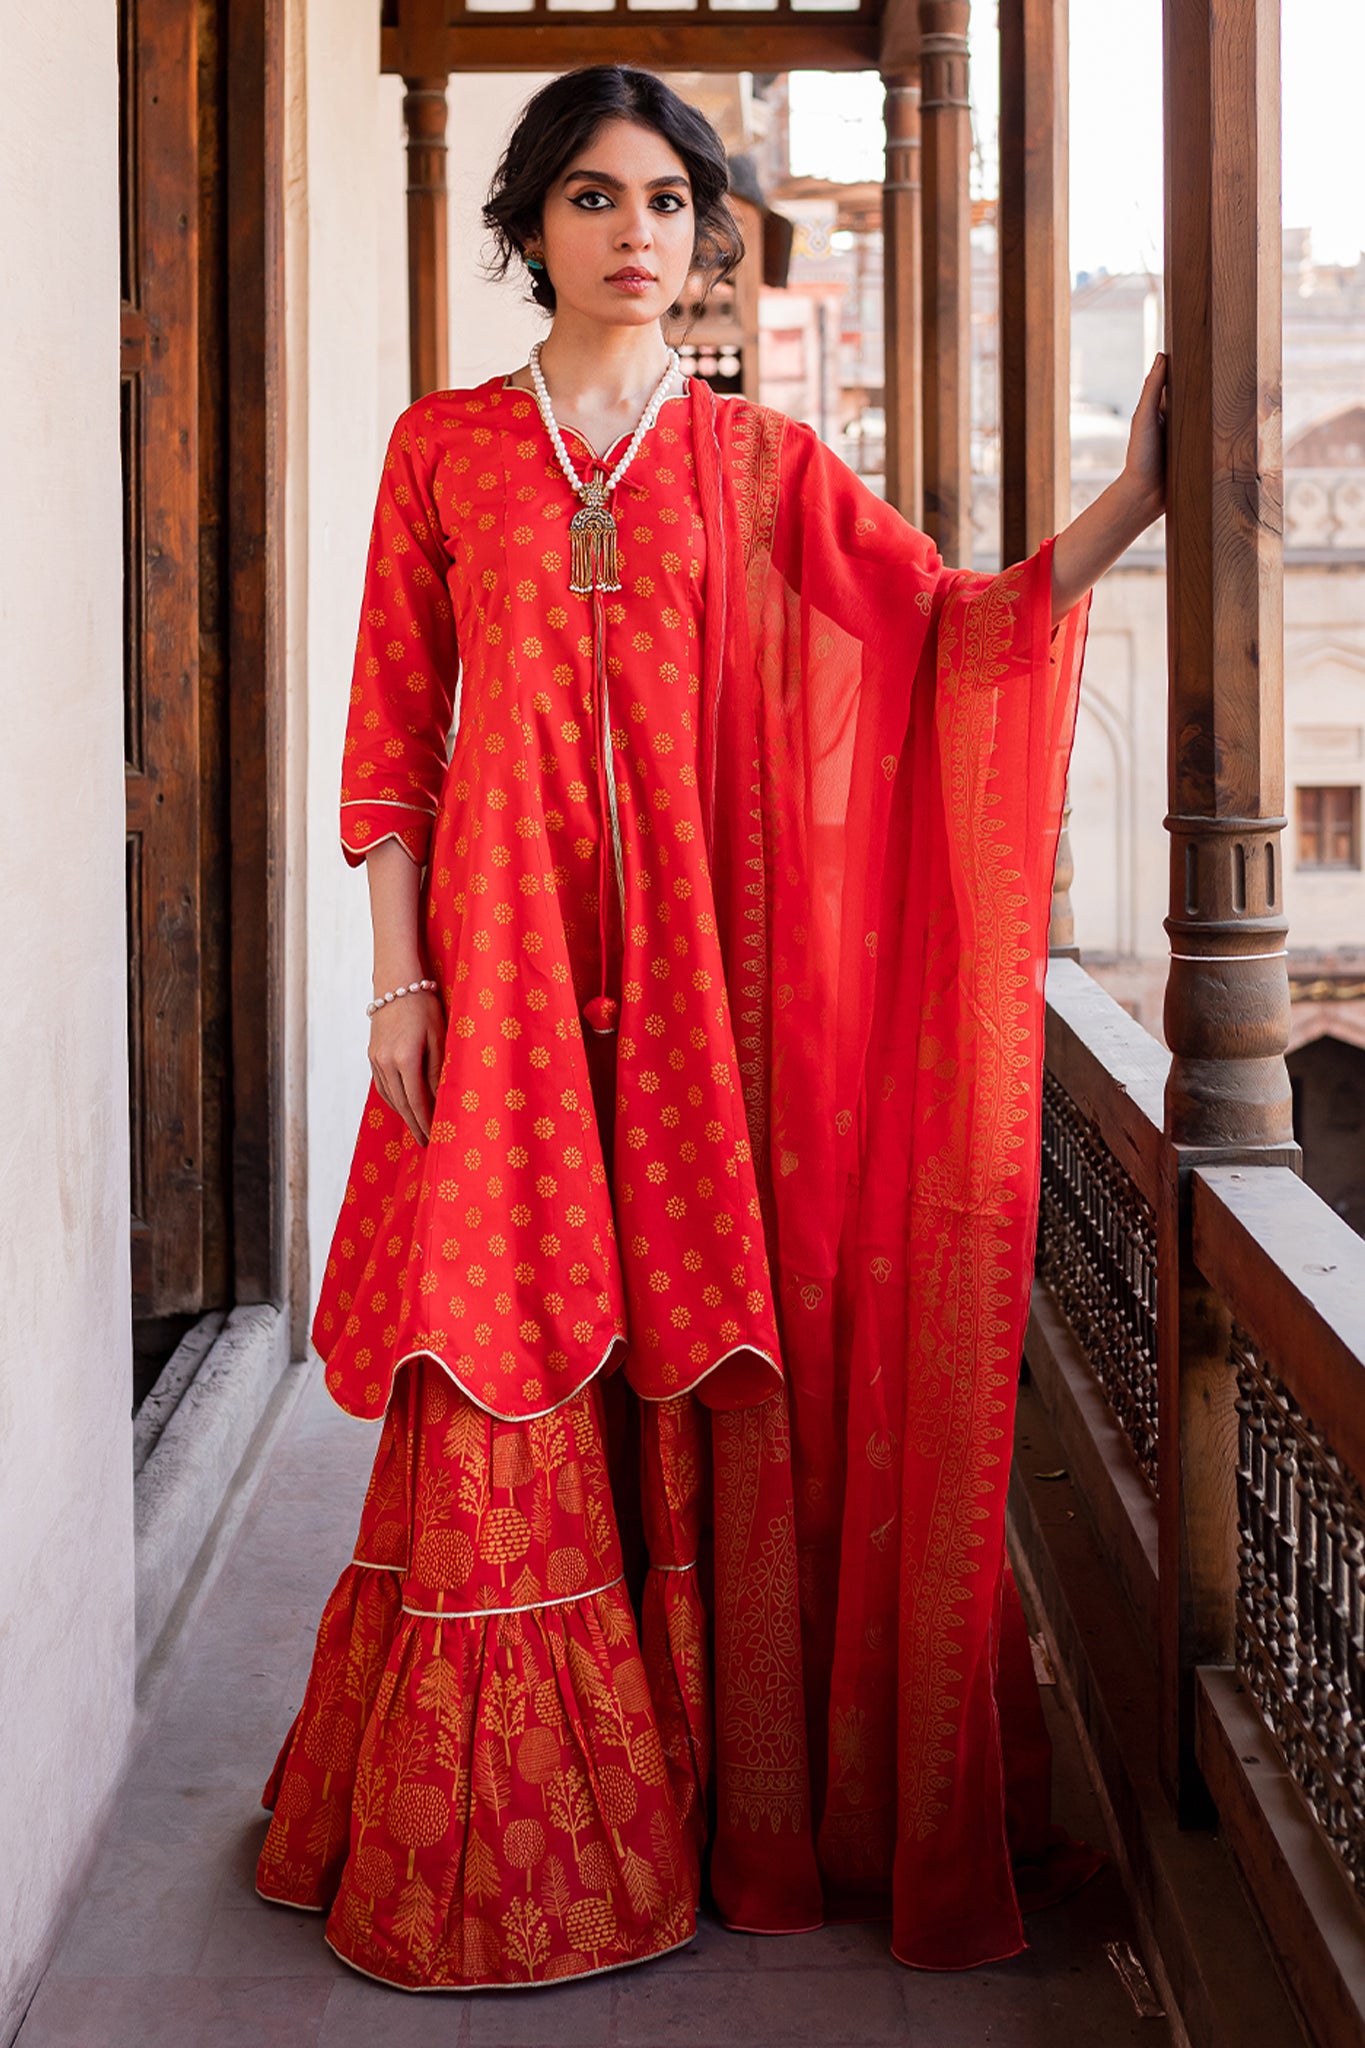 Beautiful Bride Red Anarkali Suit with Plazo/Skirt.